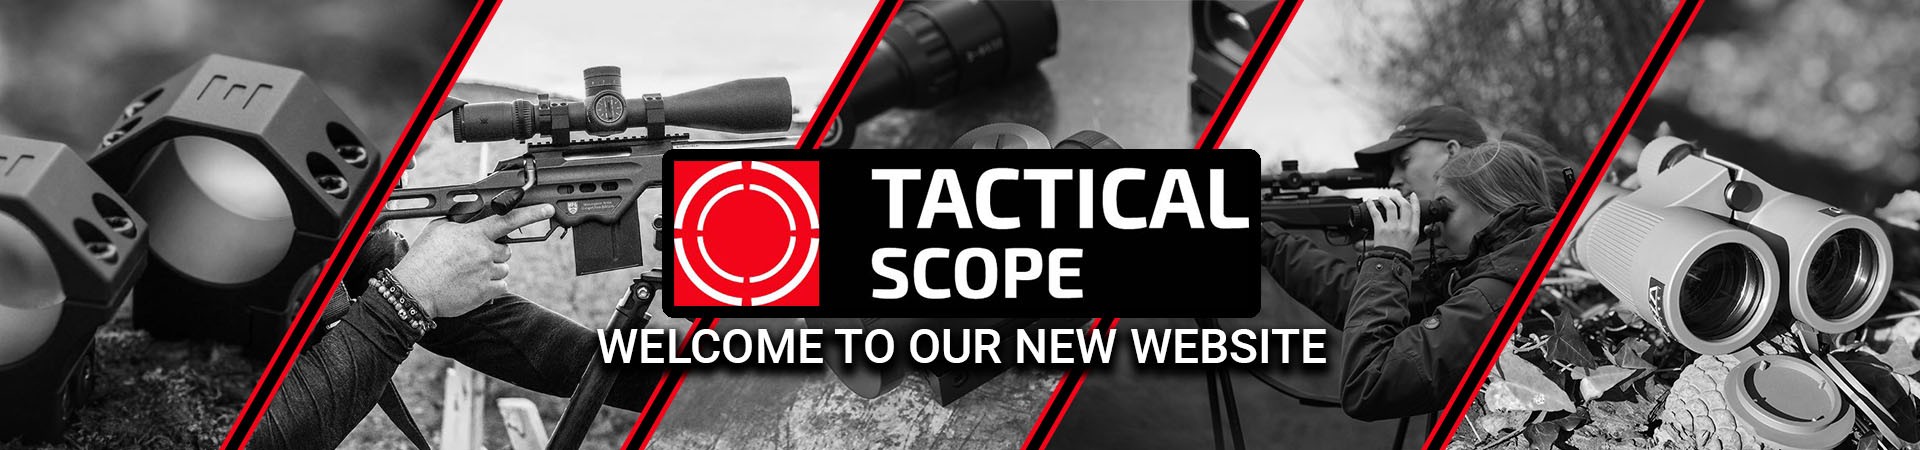 Tactical Scope Homepage